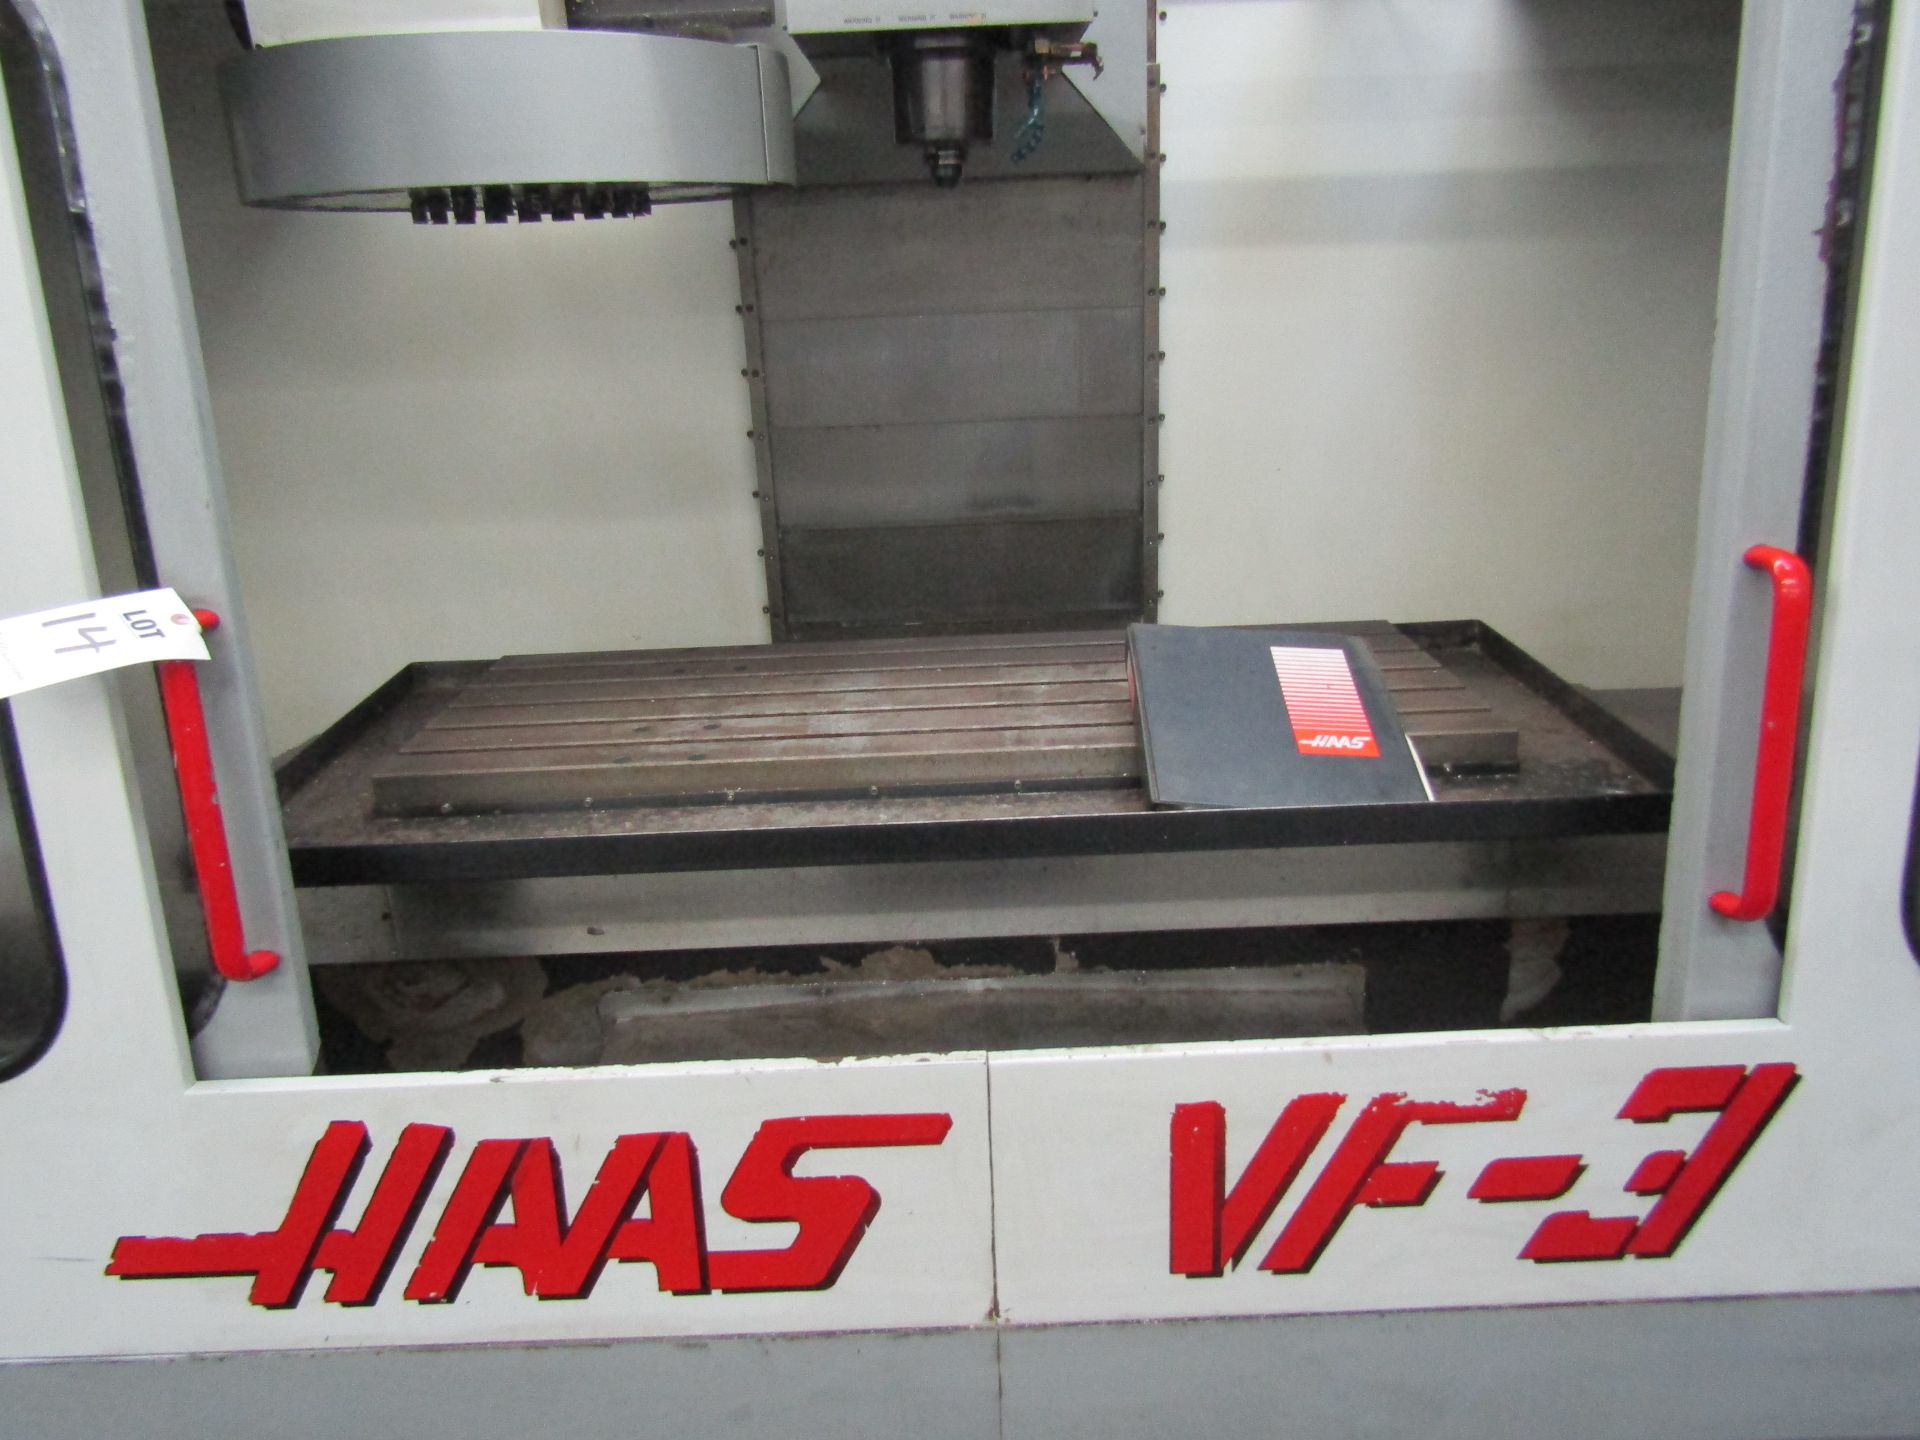 1995 HAAS VF-3 VERTICAL MACHINING CENTER, TRAVELS: 30 X 20 X 20, 21 ATC, HAAS CONTROL – SERIAL#: - Image 2 of 11